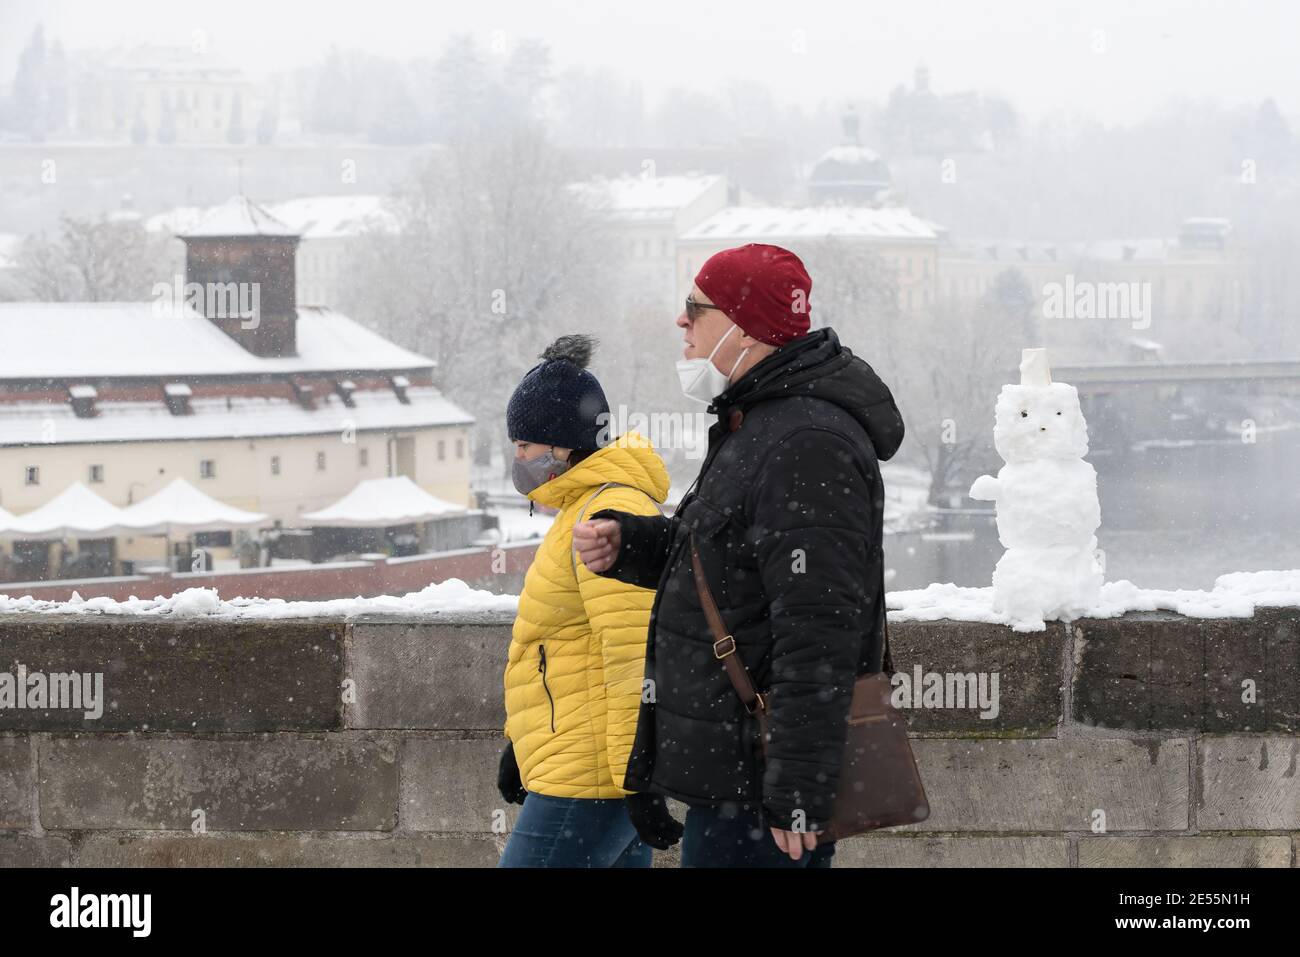 A couple wearing face masks as a preventive measure against the spread of coronavirus walk past a snowman on Charles Bridge during snowfall. Heavy snowfall is observed in the Prague, historical city center, which is part of the Unesco heritage, and iconic Charles bridge. Stock Photo